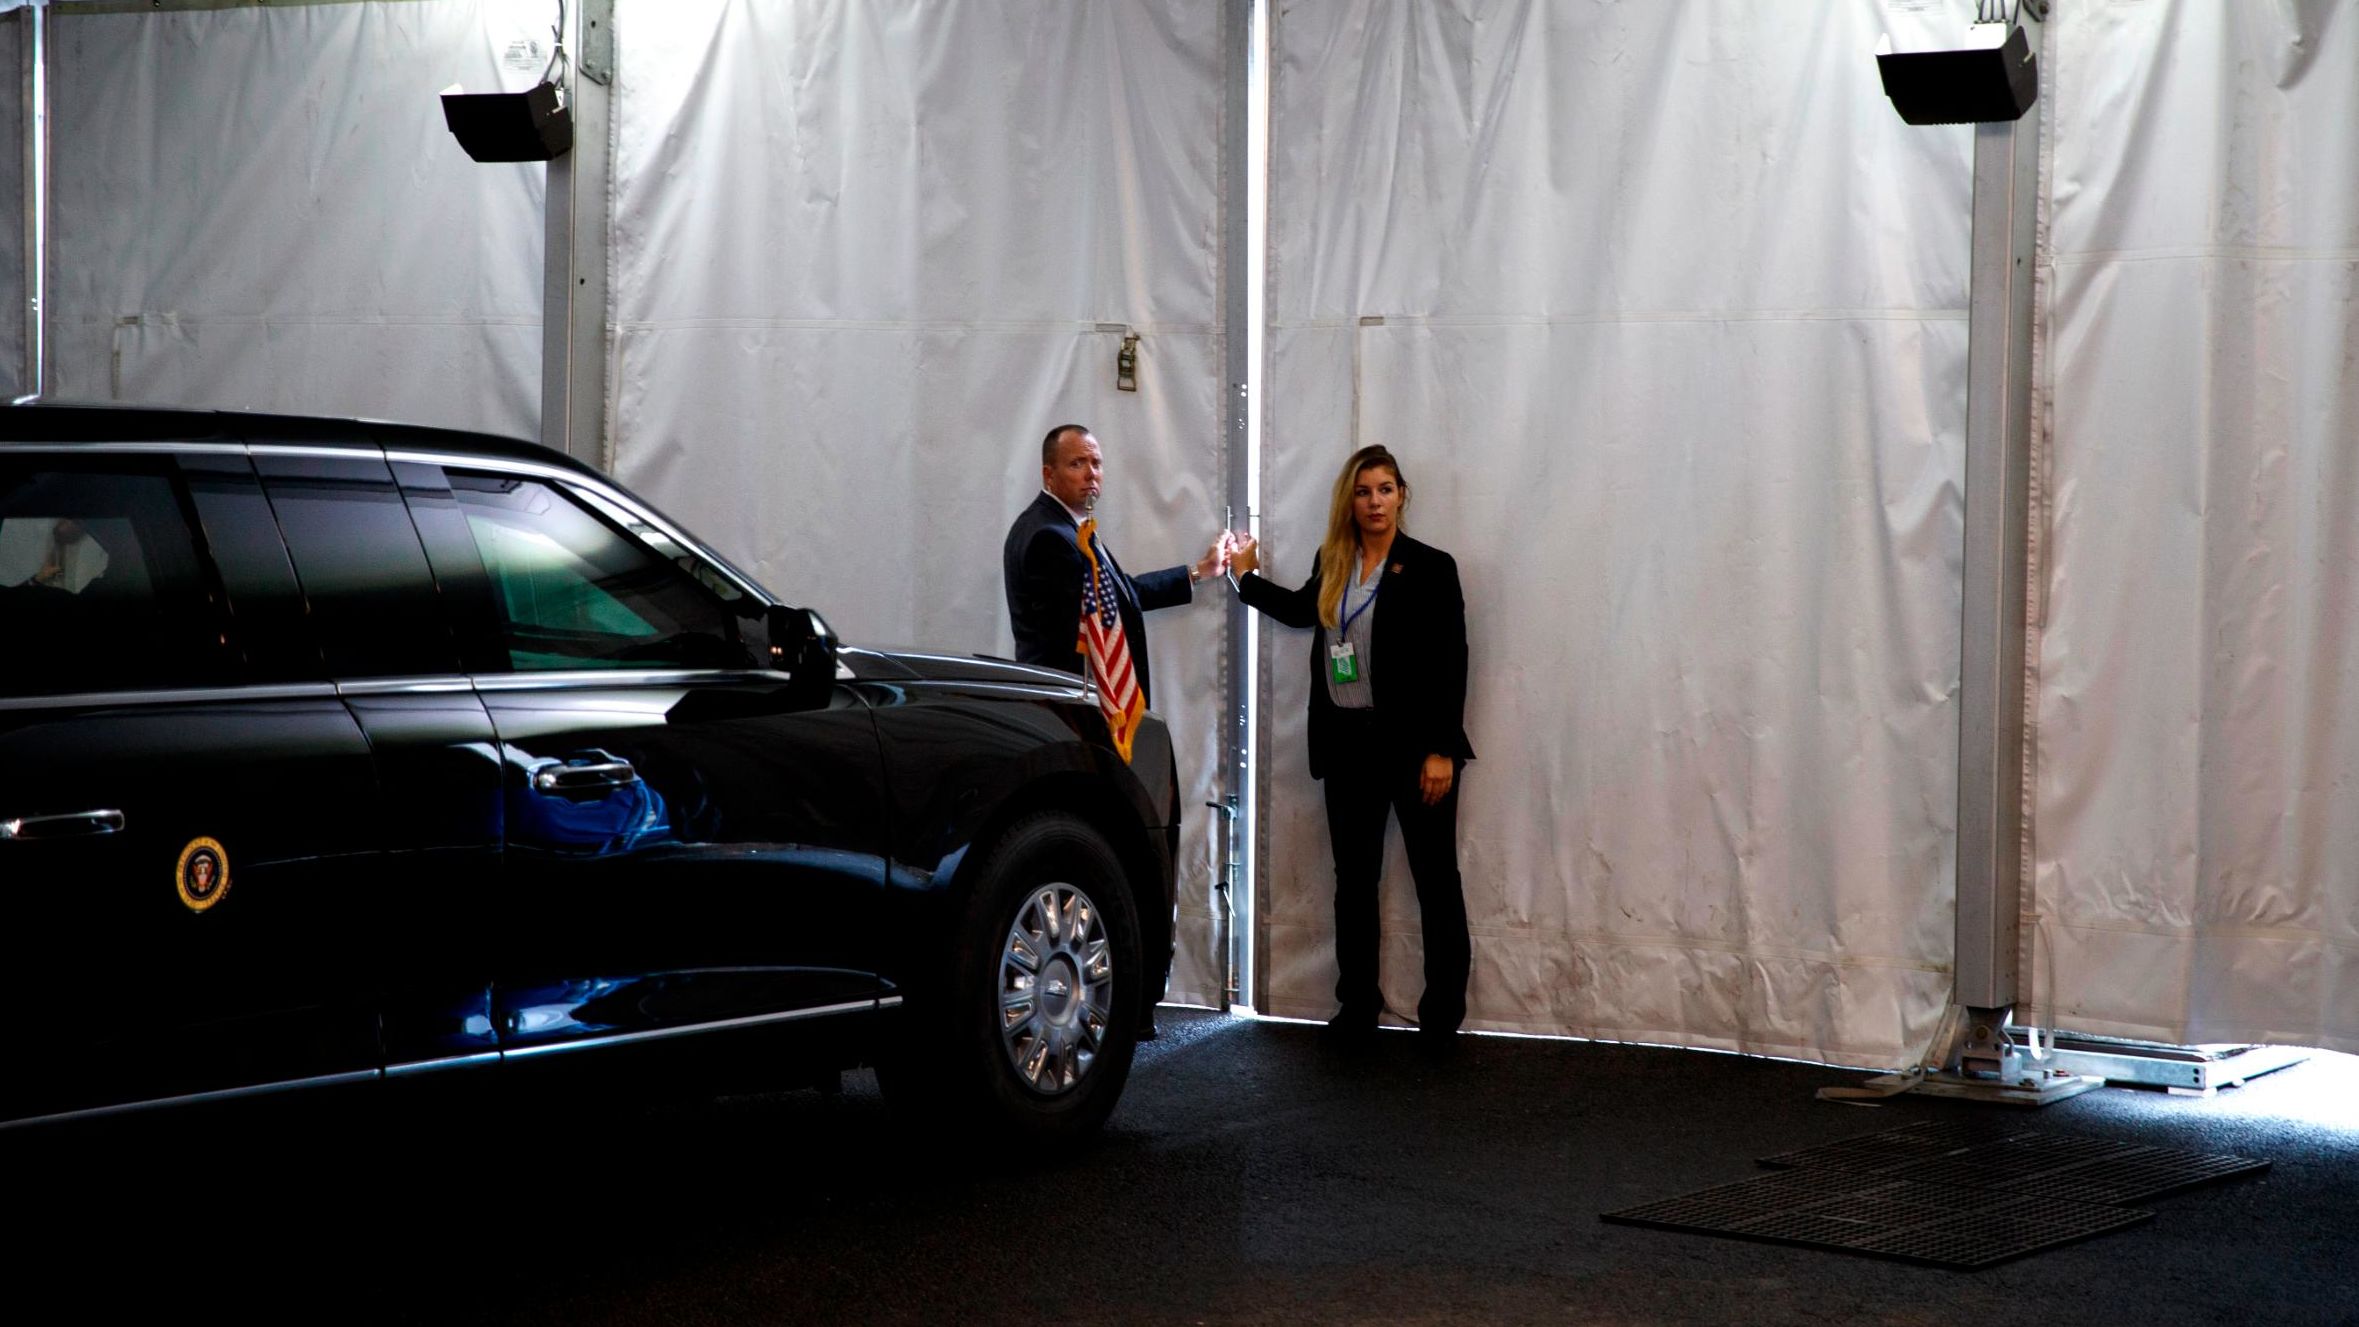 Secret Service agents stand next to President Trump's vehicle on Wednesday.